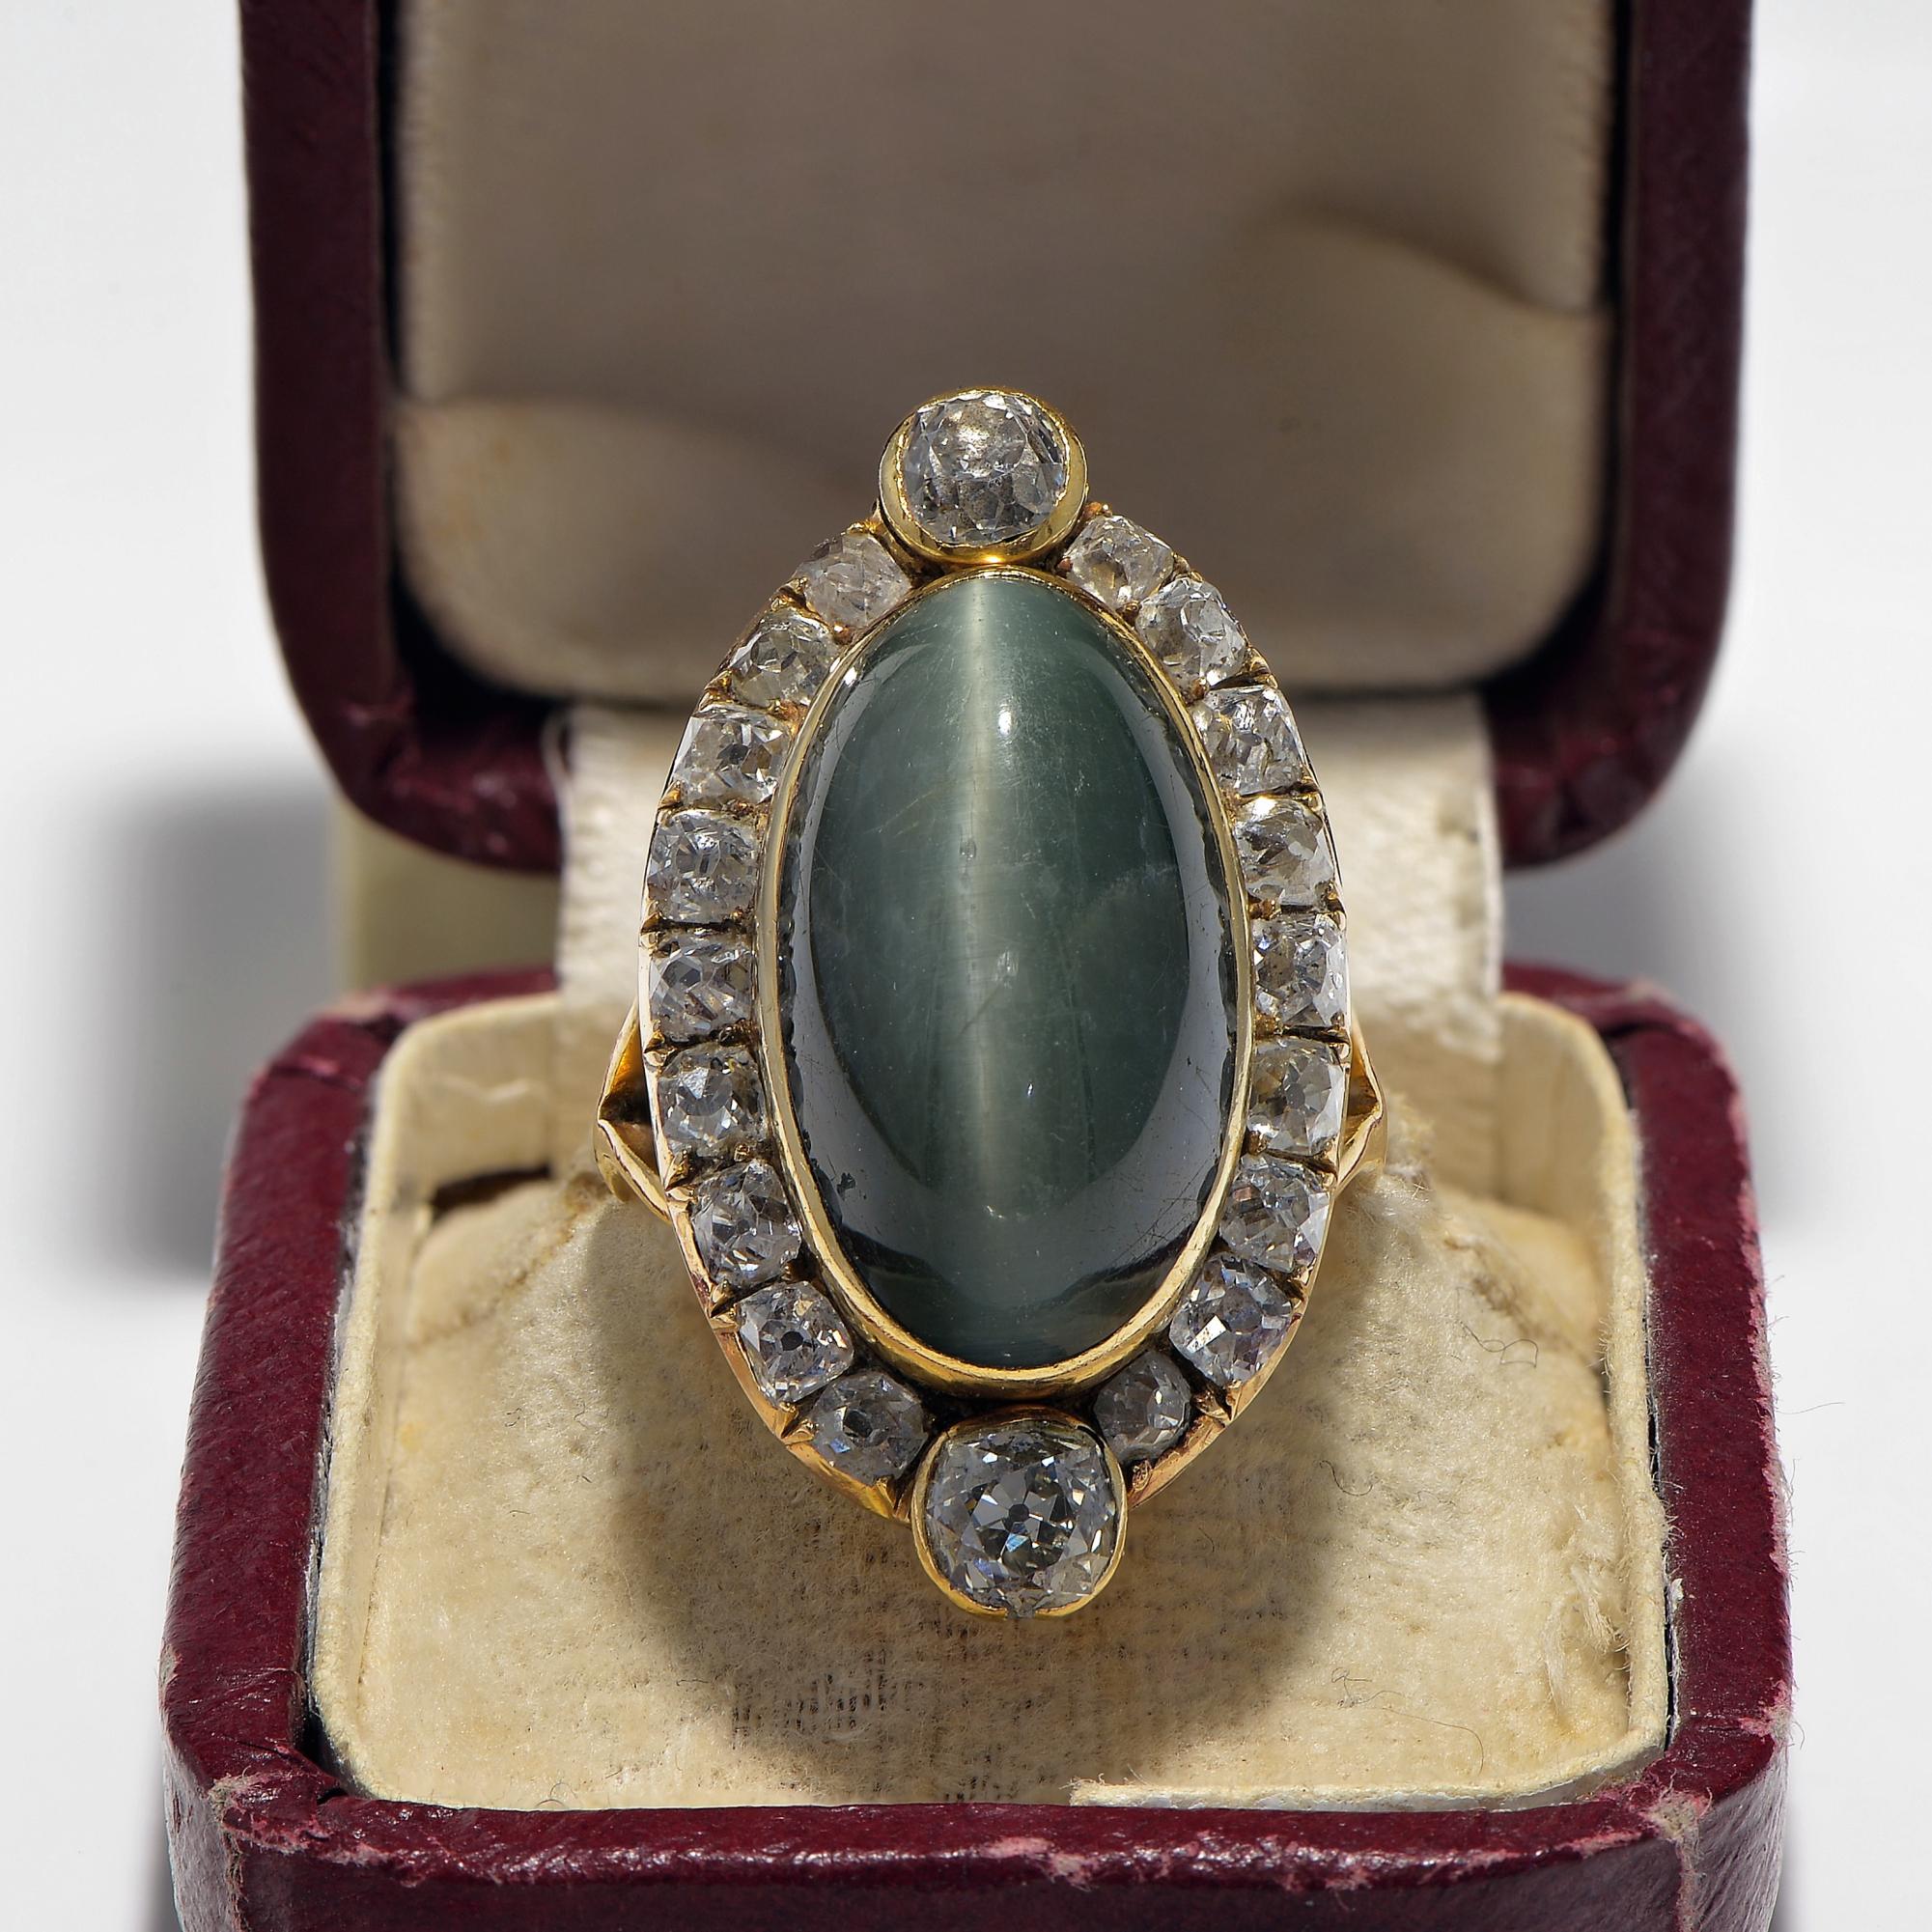 A wonder to behold
An exceptional and quite unique Victorian period statement ring hand crafted of solid 22 KT gold, marked, 1880 ca. shank later replacement
Chrysoberyl, one of the gemstone kingdom’s most phenomenal gems, has been prized for